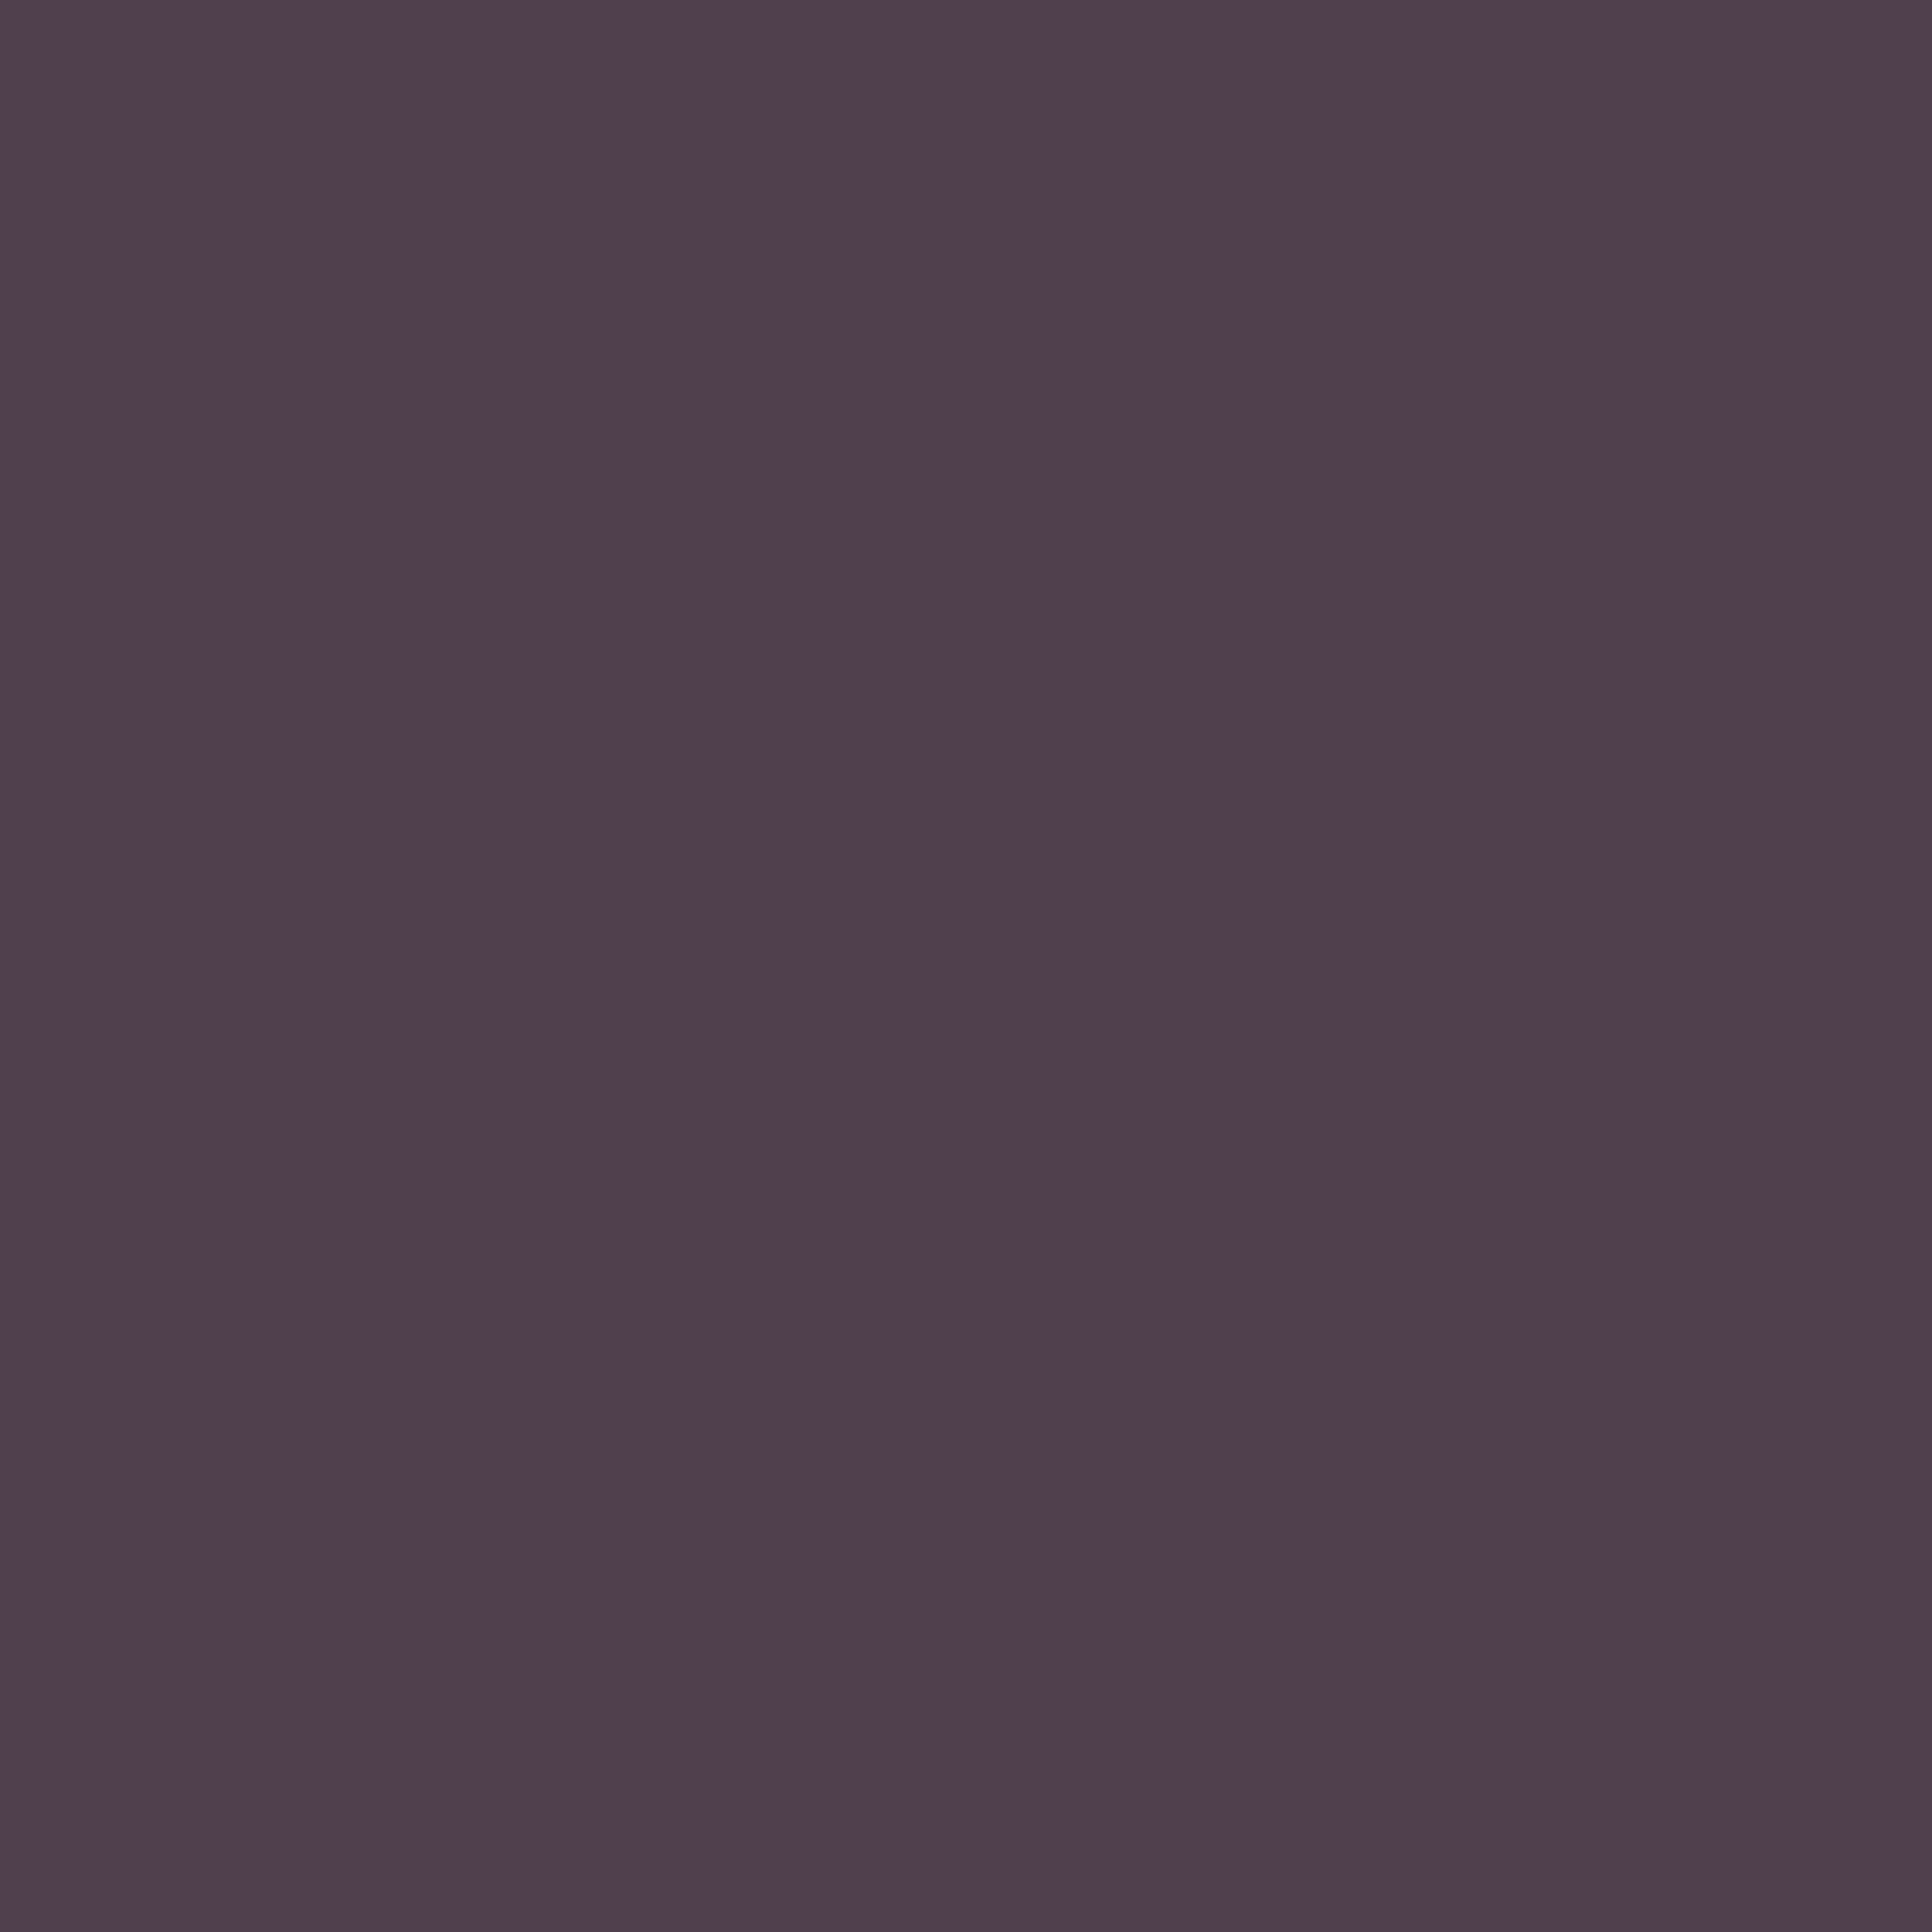 2732x2732 Purple Taupe Solid Color Background